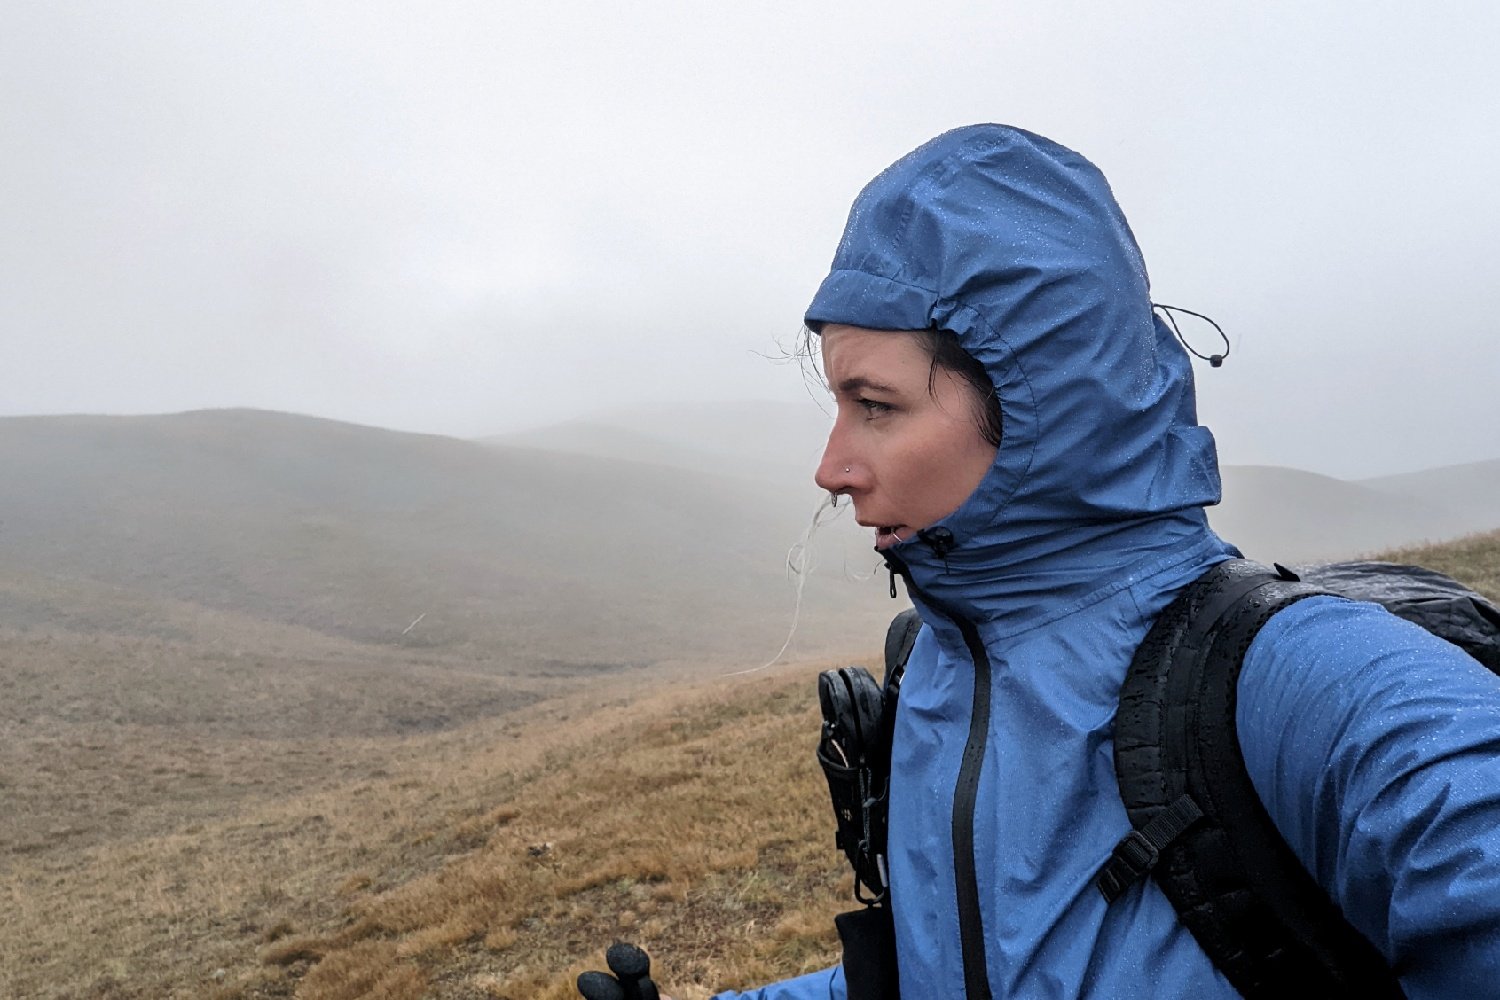 A side view of a hiker wearing the Enlightened Equipment Visp Rain Jacket with the hood up on a rainy mountain trail